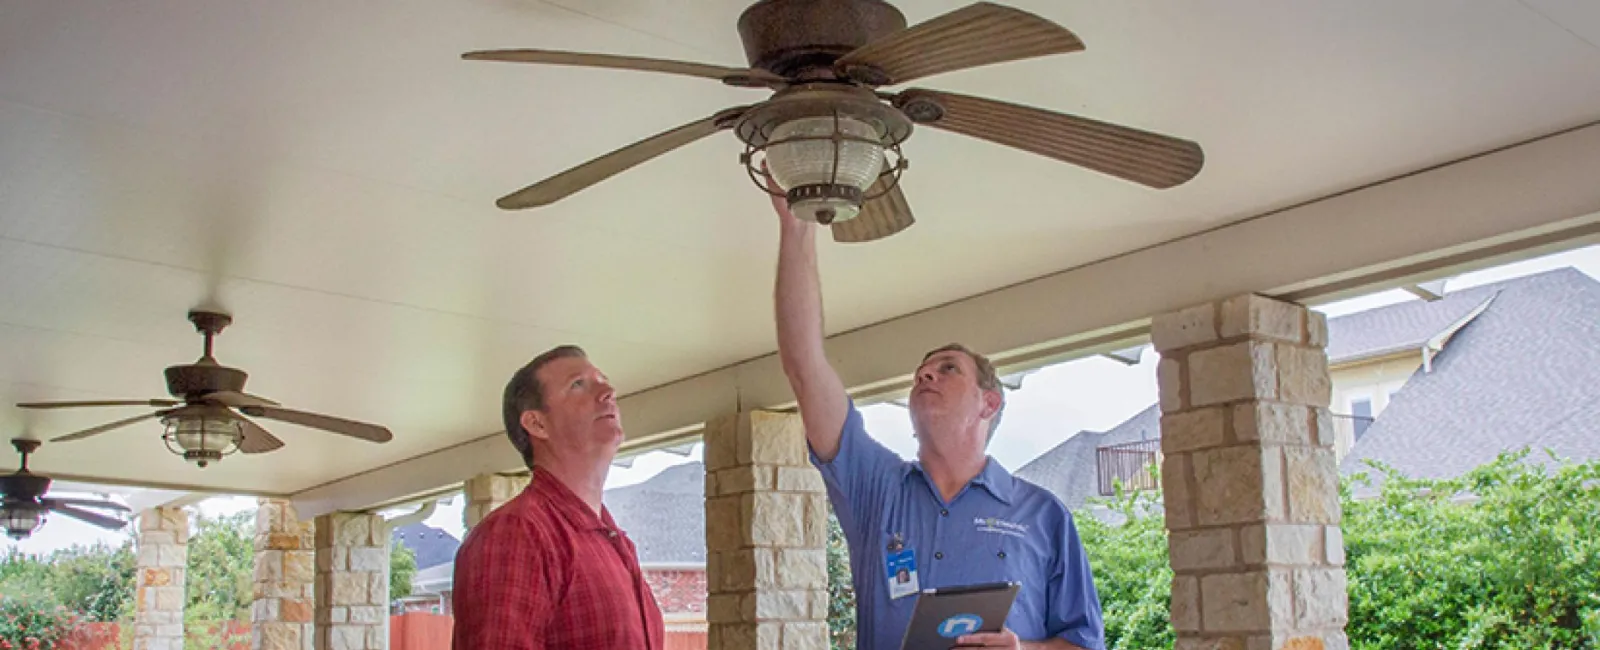 How to Install a Ceiling Fan